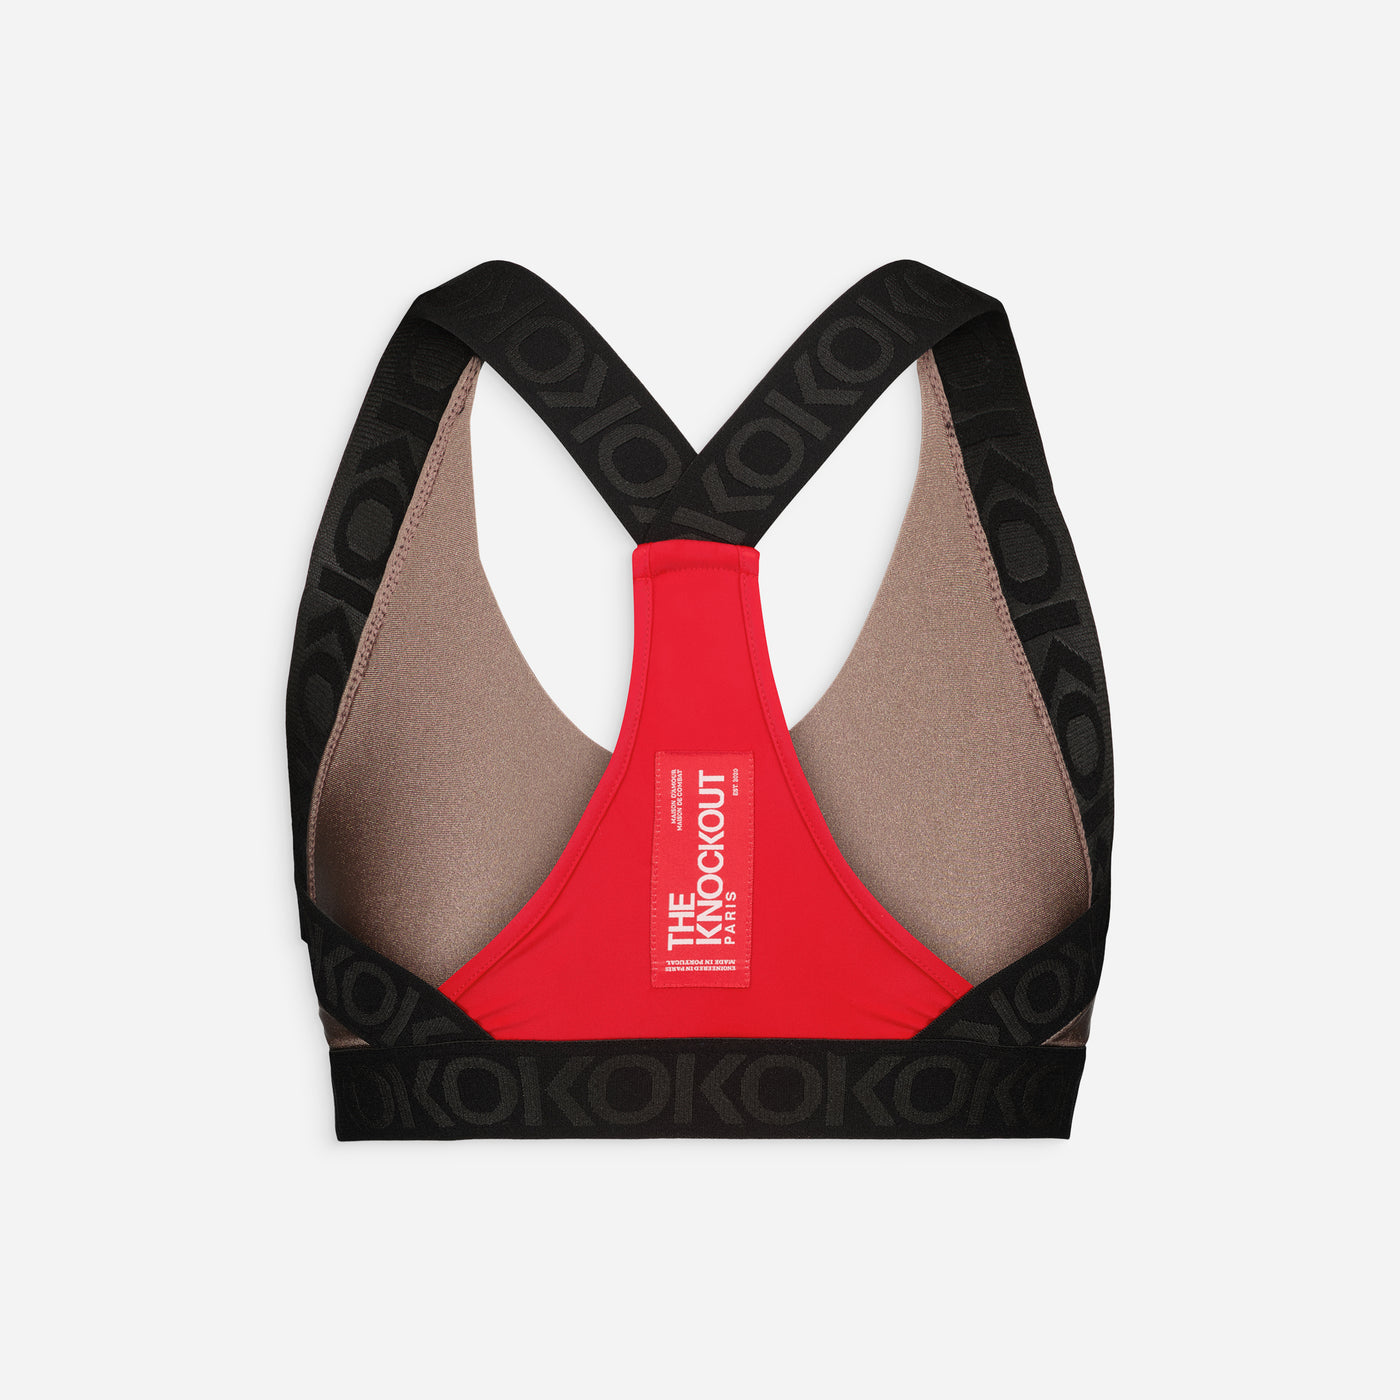 The Knockout Paris Sports bra in stardust